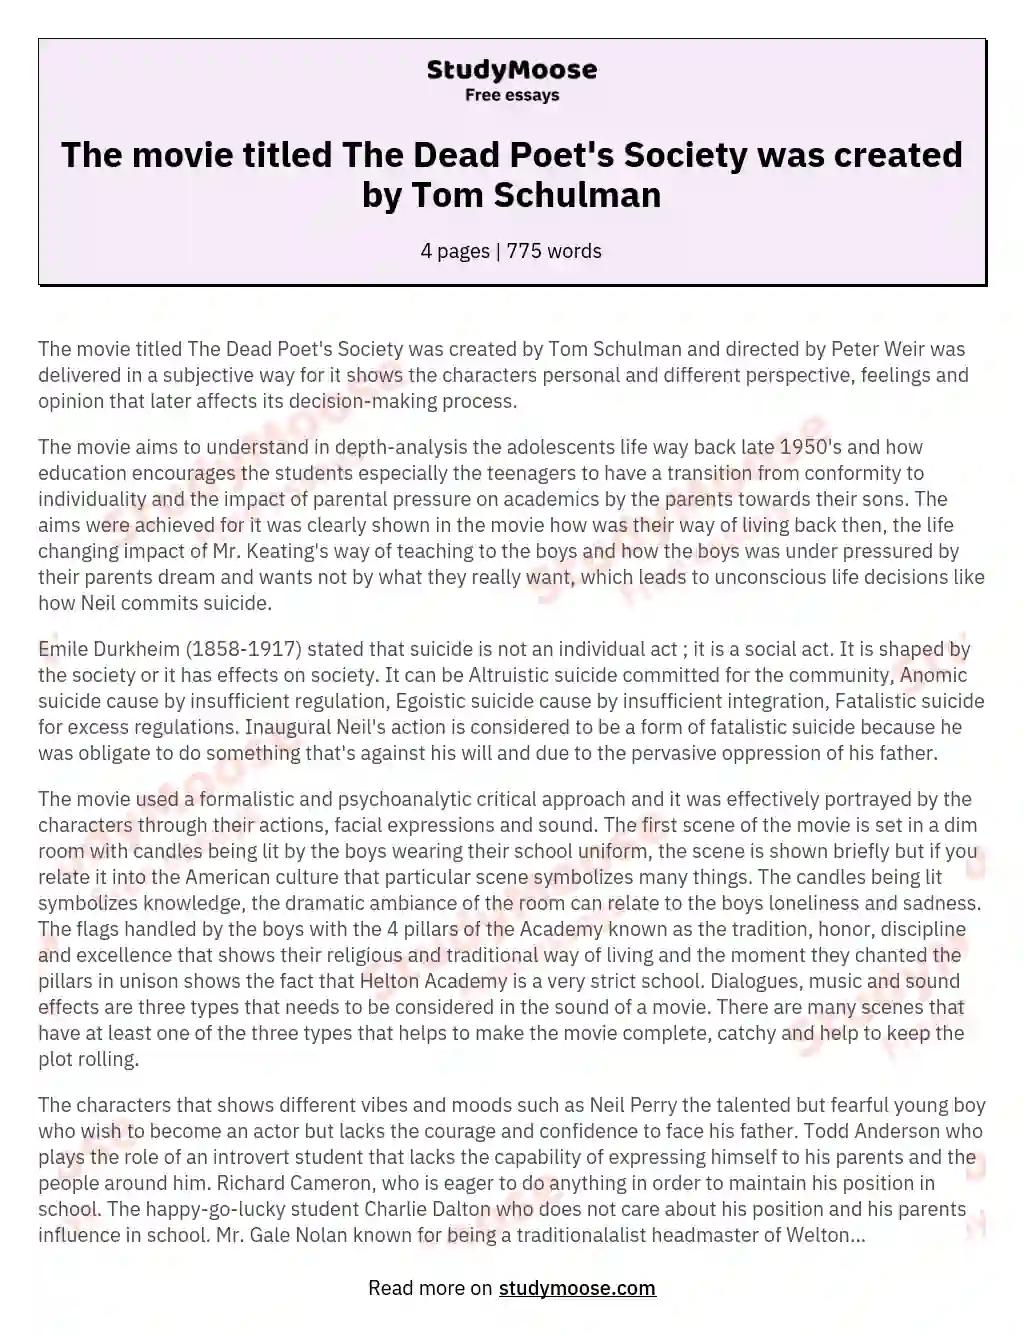 The movie titled The Dead Poet's Society was created by Tom Schulman